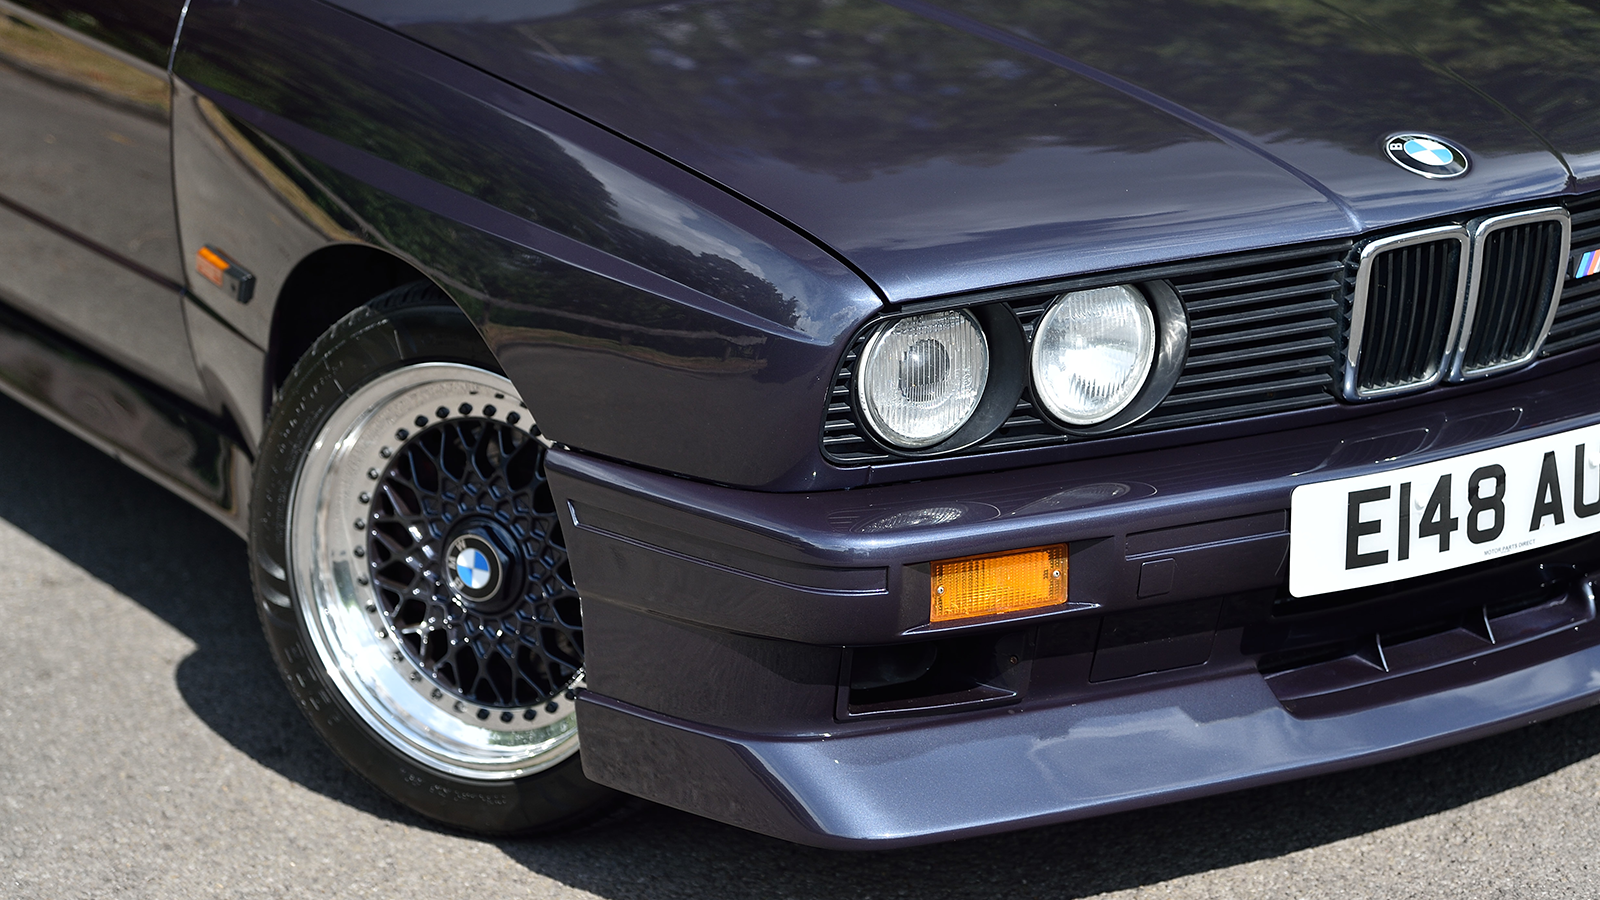 This rare E30 BMW M3 could be yours